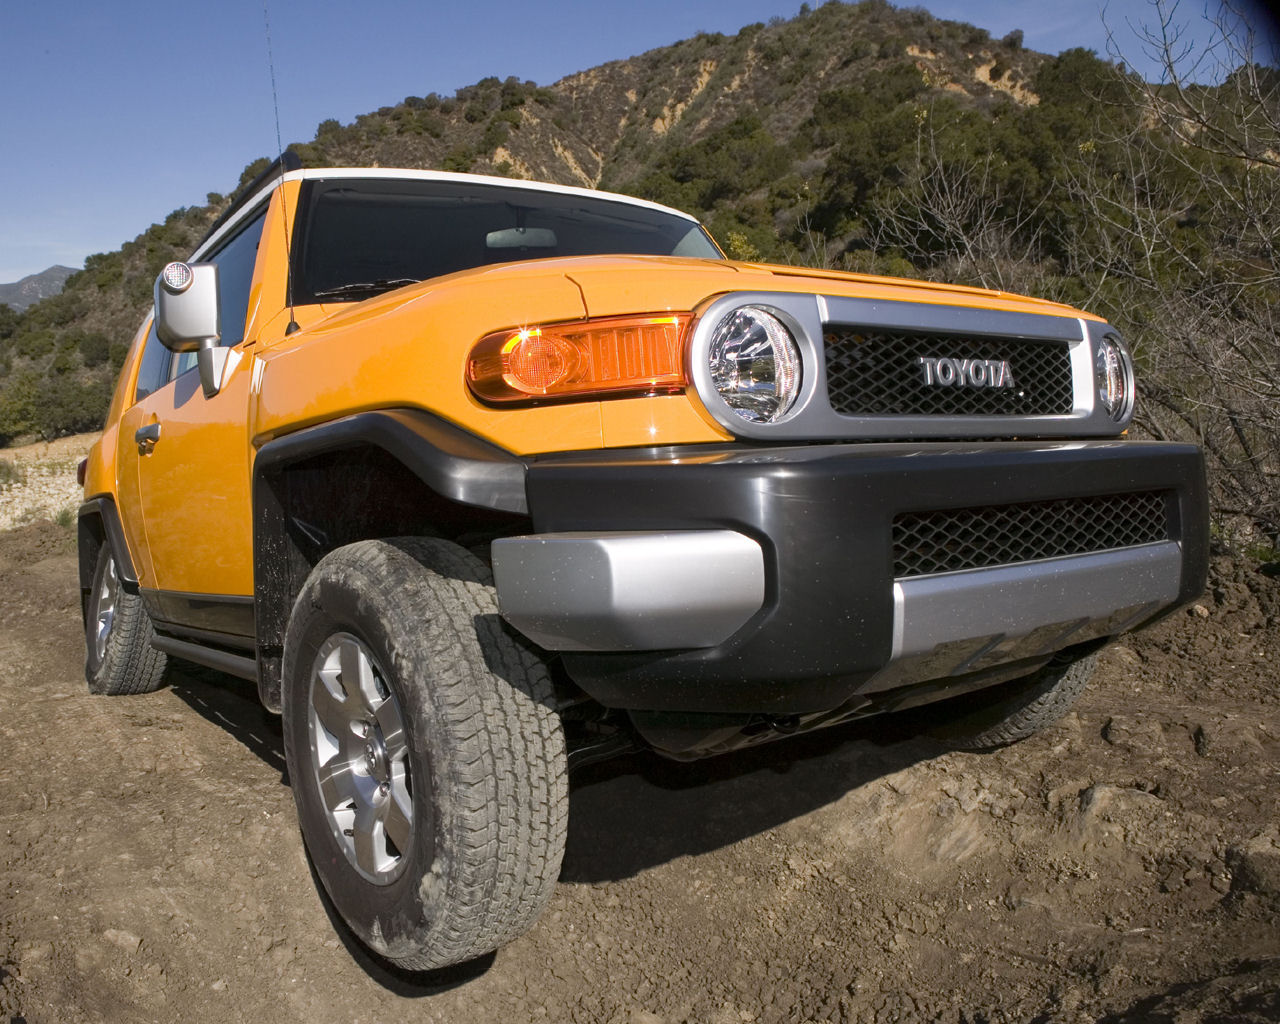 Please Right Click On The Toyota Fj Cruiser Wallpaper Below And